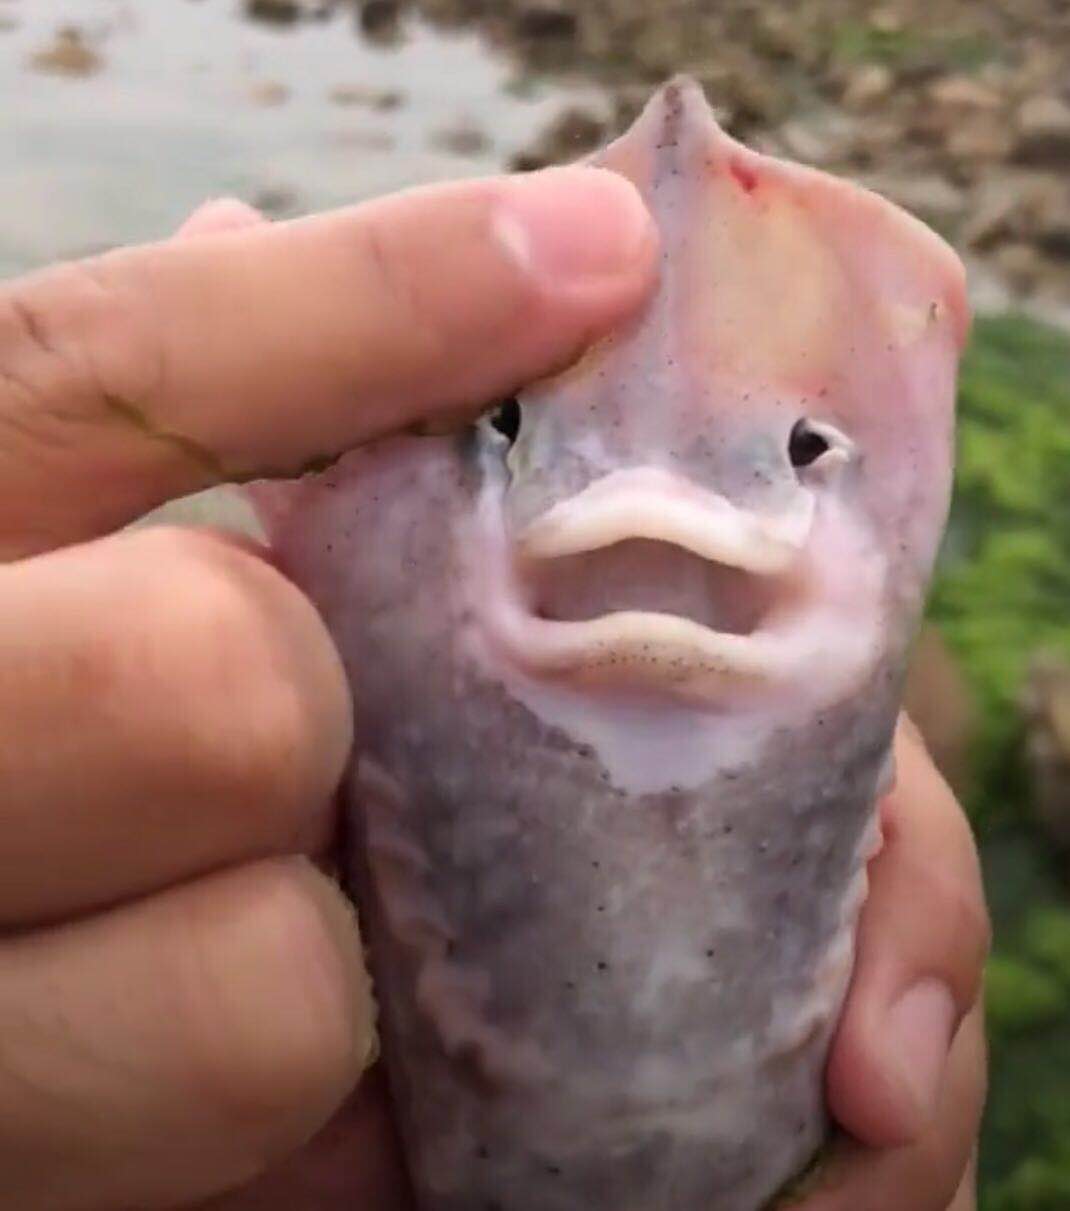 Beauty and the beast - Crazy-looking fish from the deep sea - Pictures - CBS News